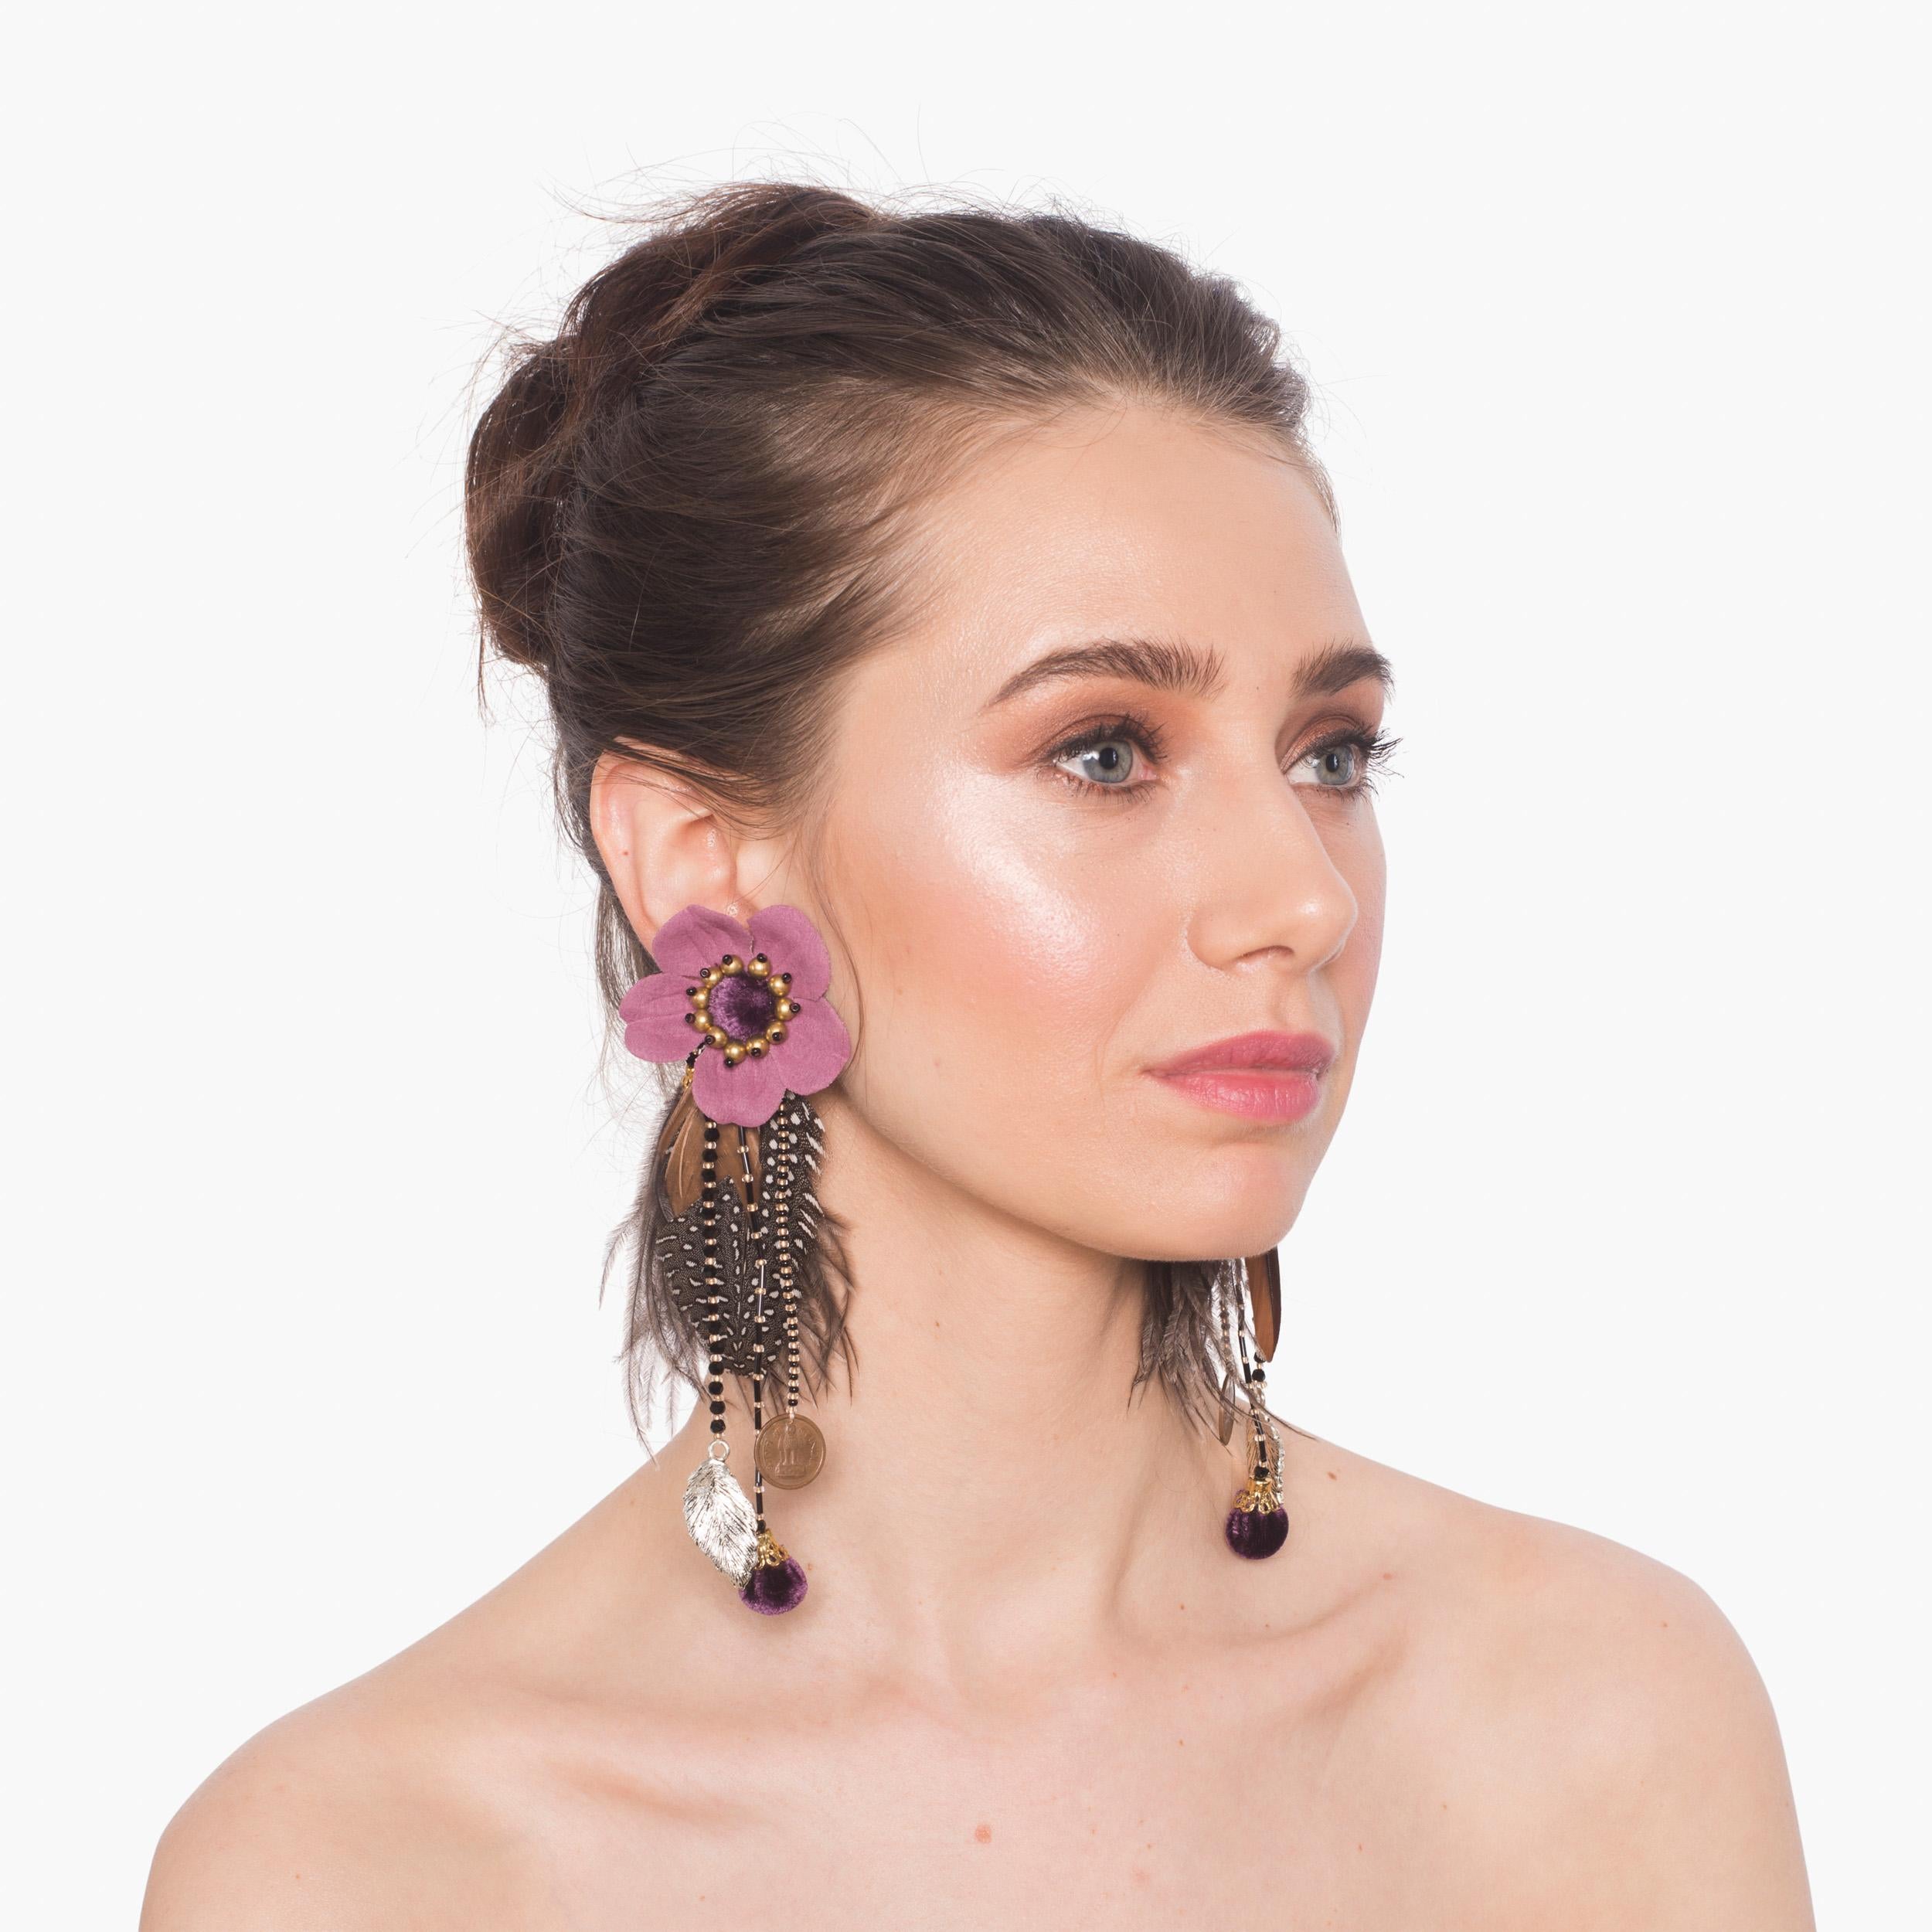 Release your inner bohemian spirit with the Laelia earring. Antique gold-dipped Indian coins and feathers give Laelia a flirtatious flair for every free spirit. 